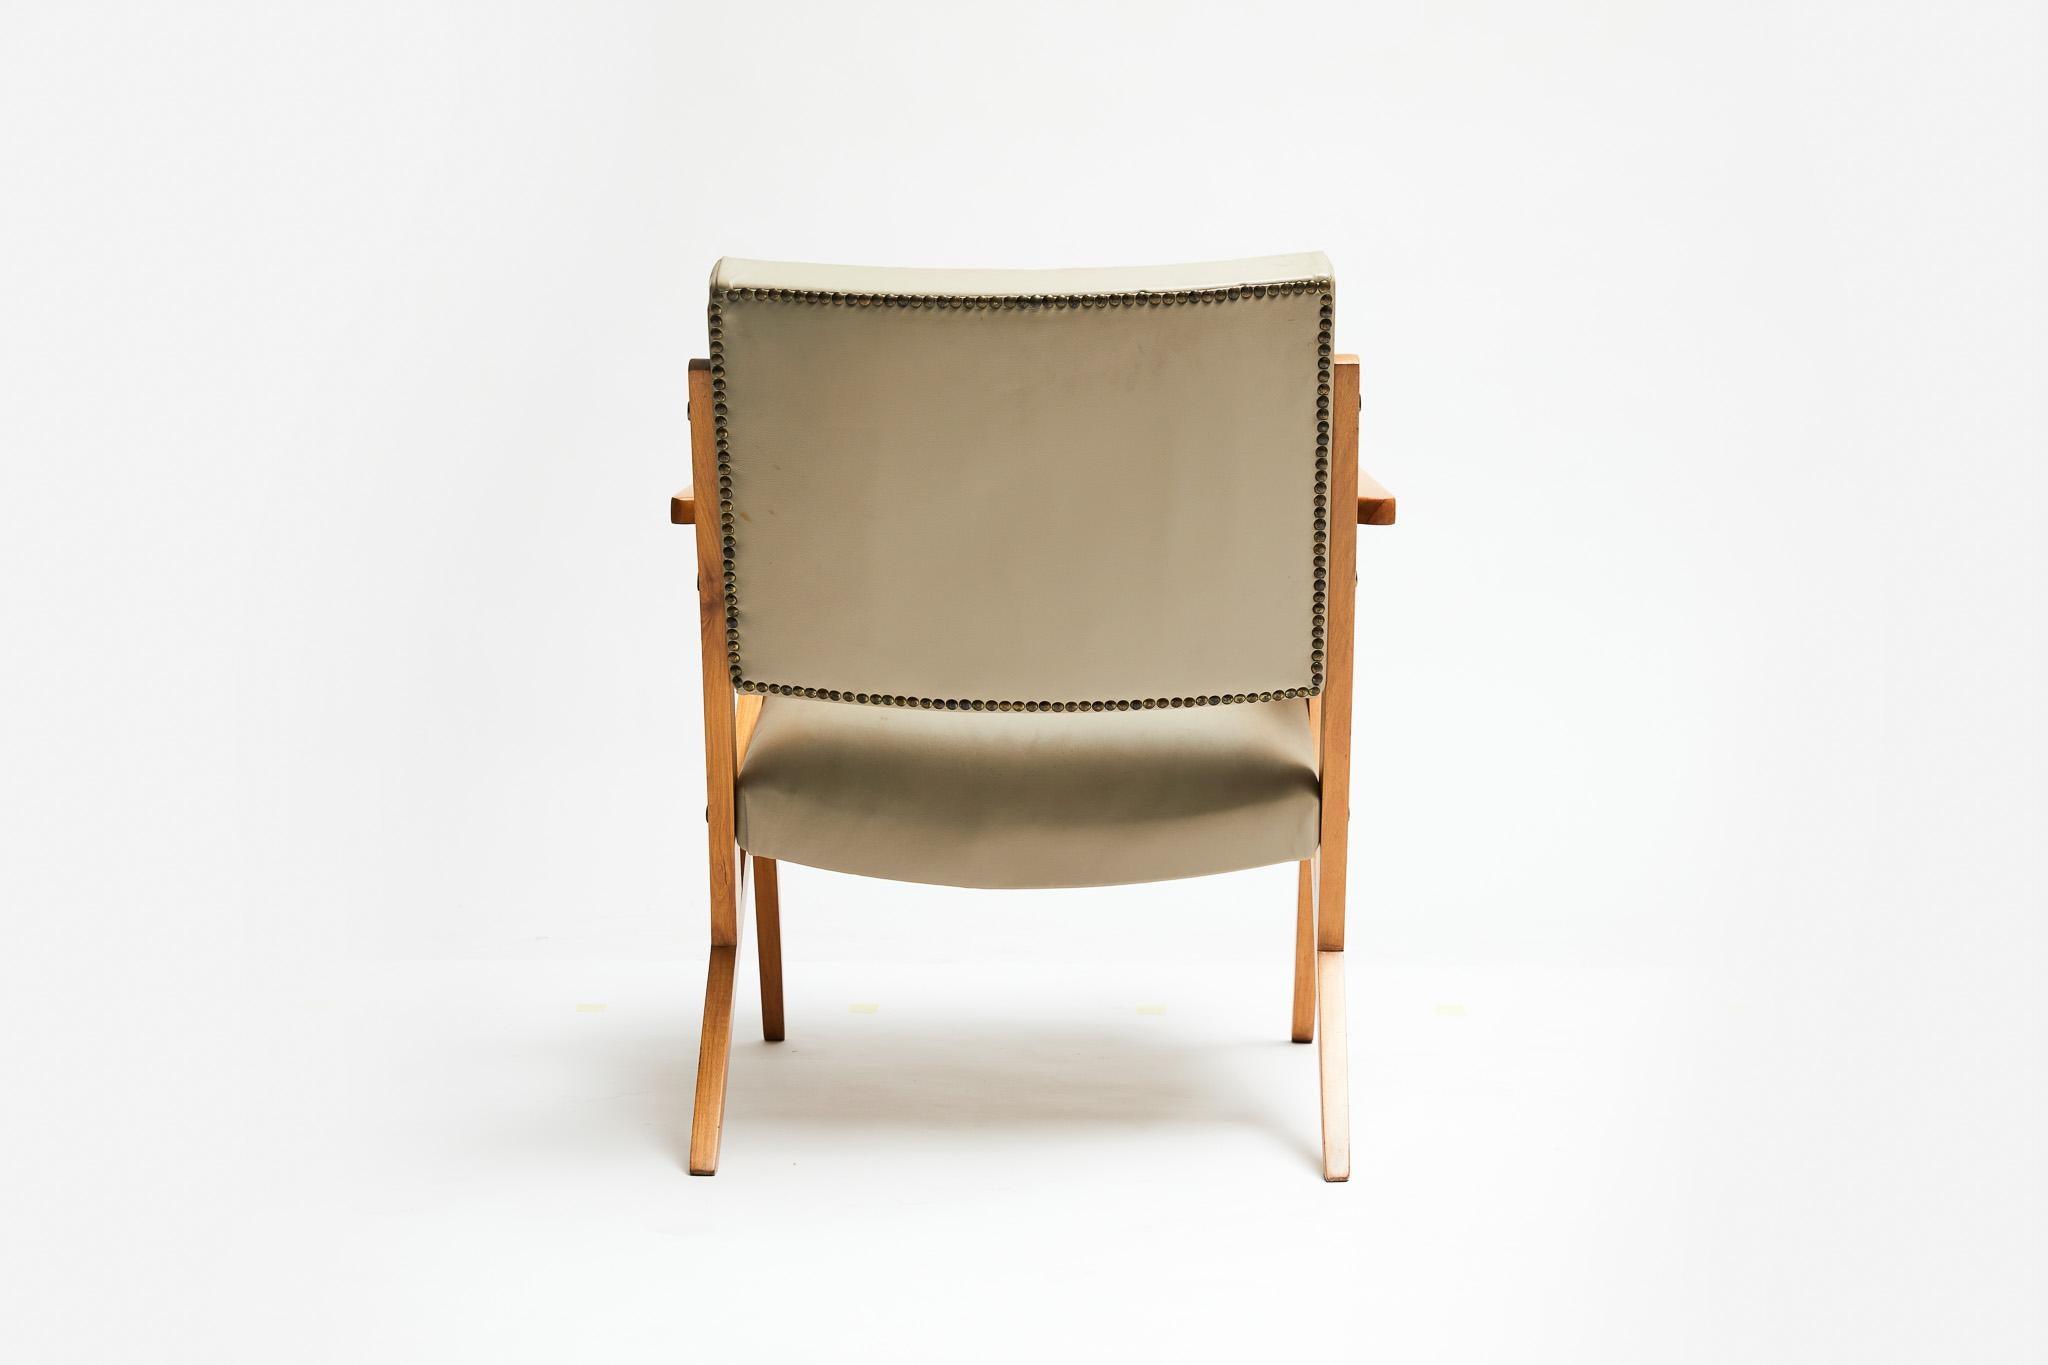 Brazilian Modern Armchair in Wood & Mint Faux Leather, Jose Zanine Caldas, 1950s In Good Condition For Sale In New York, NY